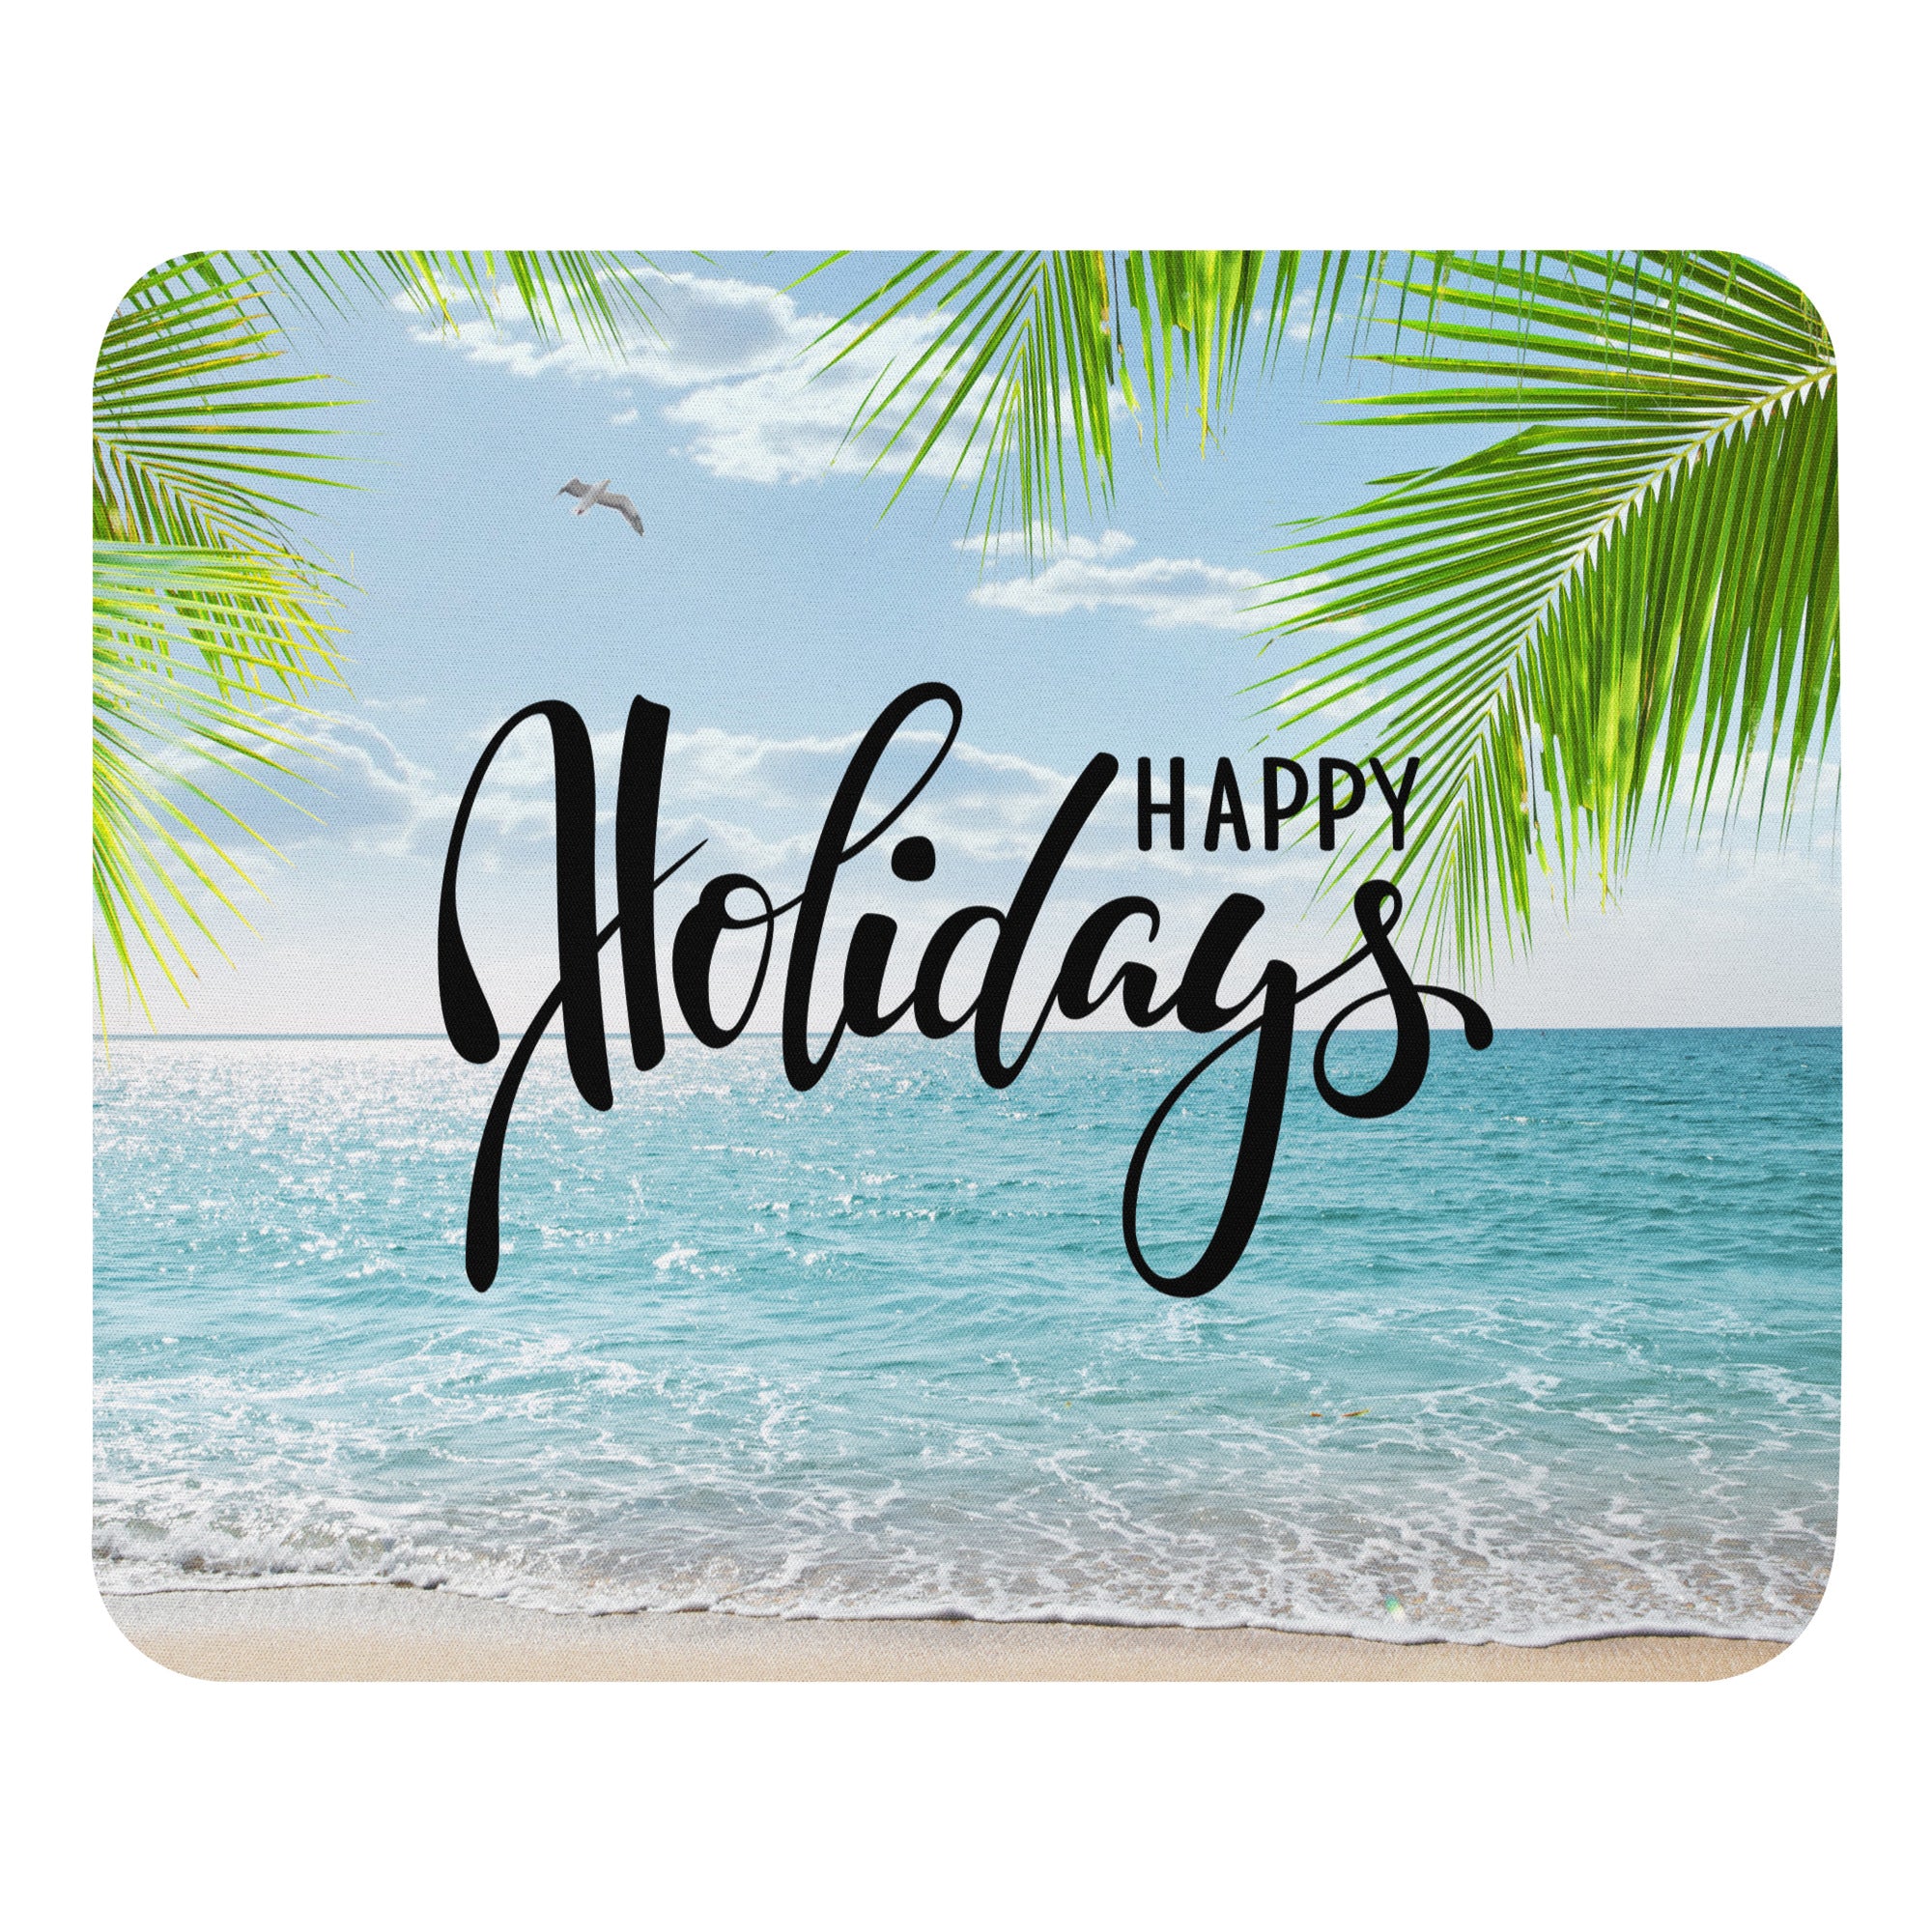 Happy Summer Holidays - Mouse Pad